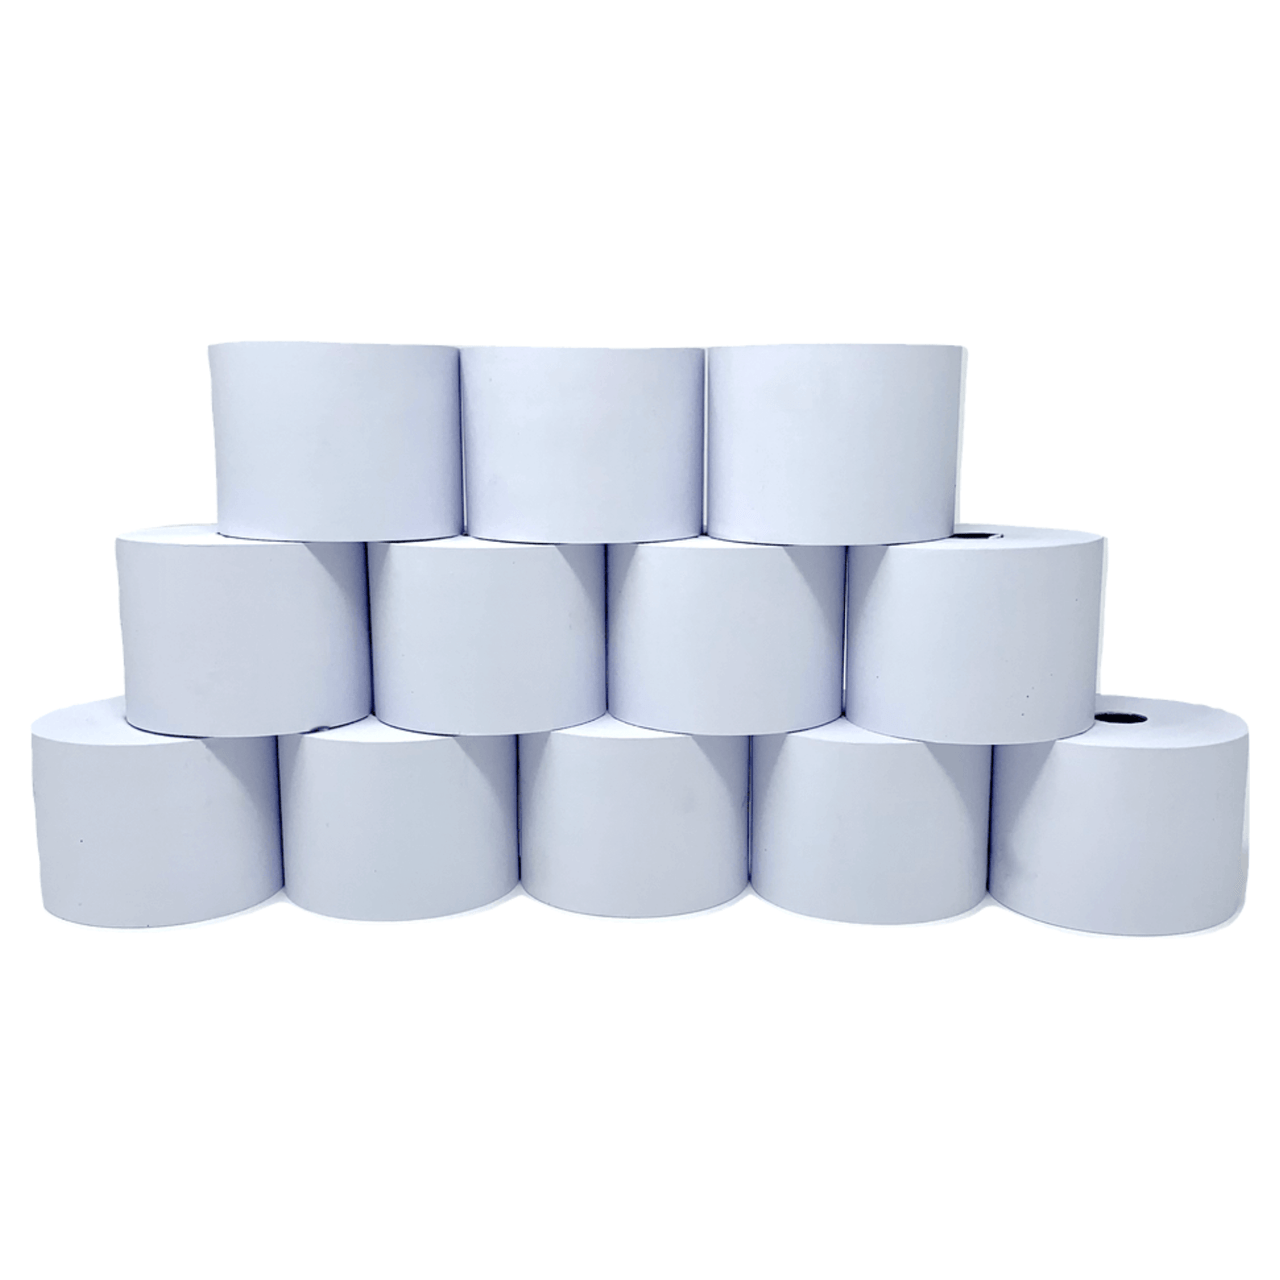 AR12225 20 lb. Bond Paper Rolls - Monroe Systems for Business